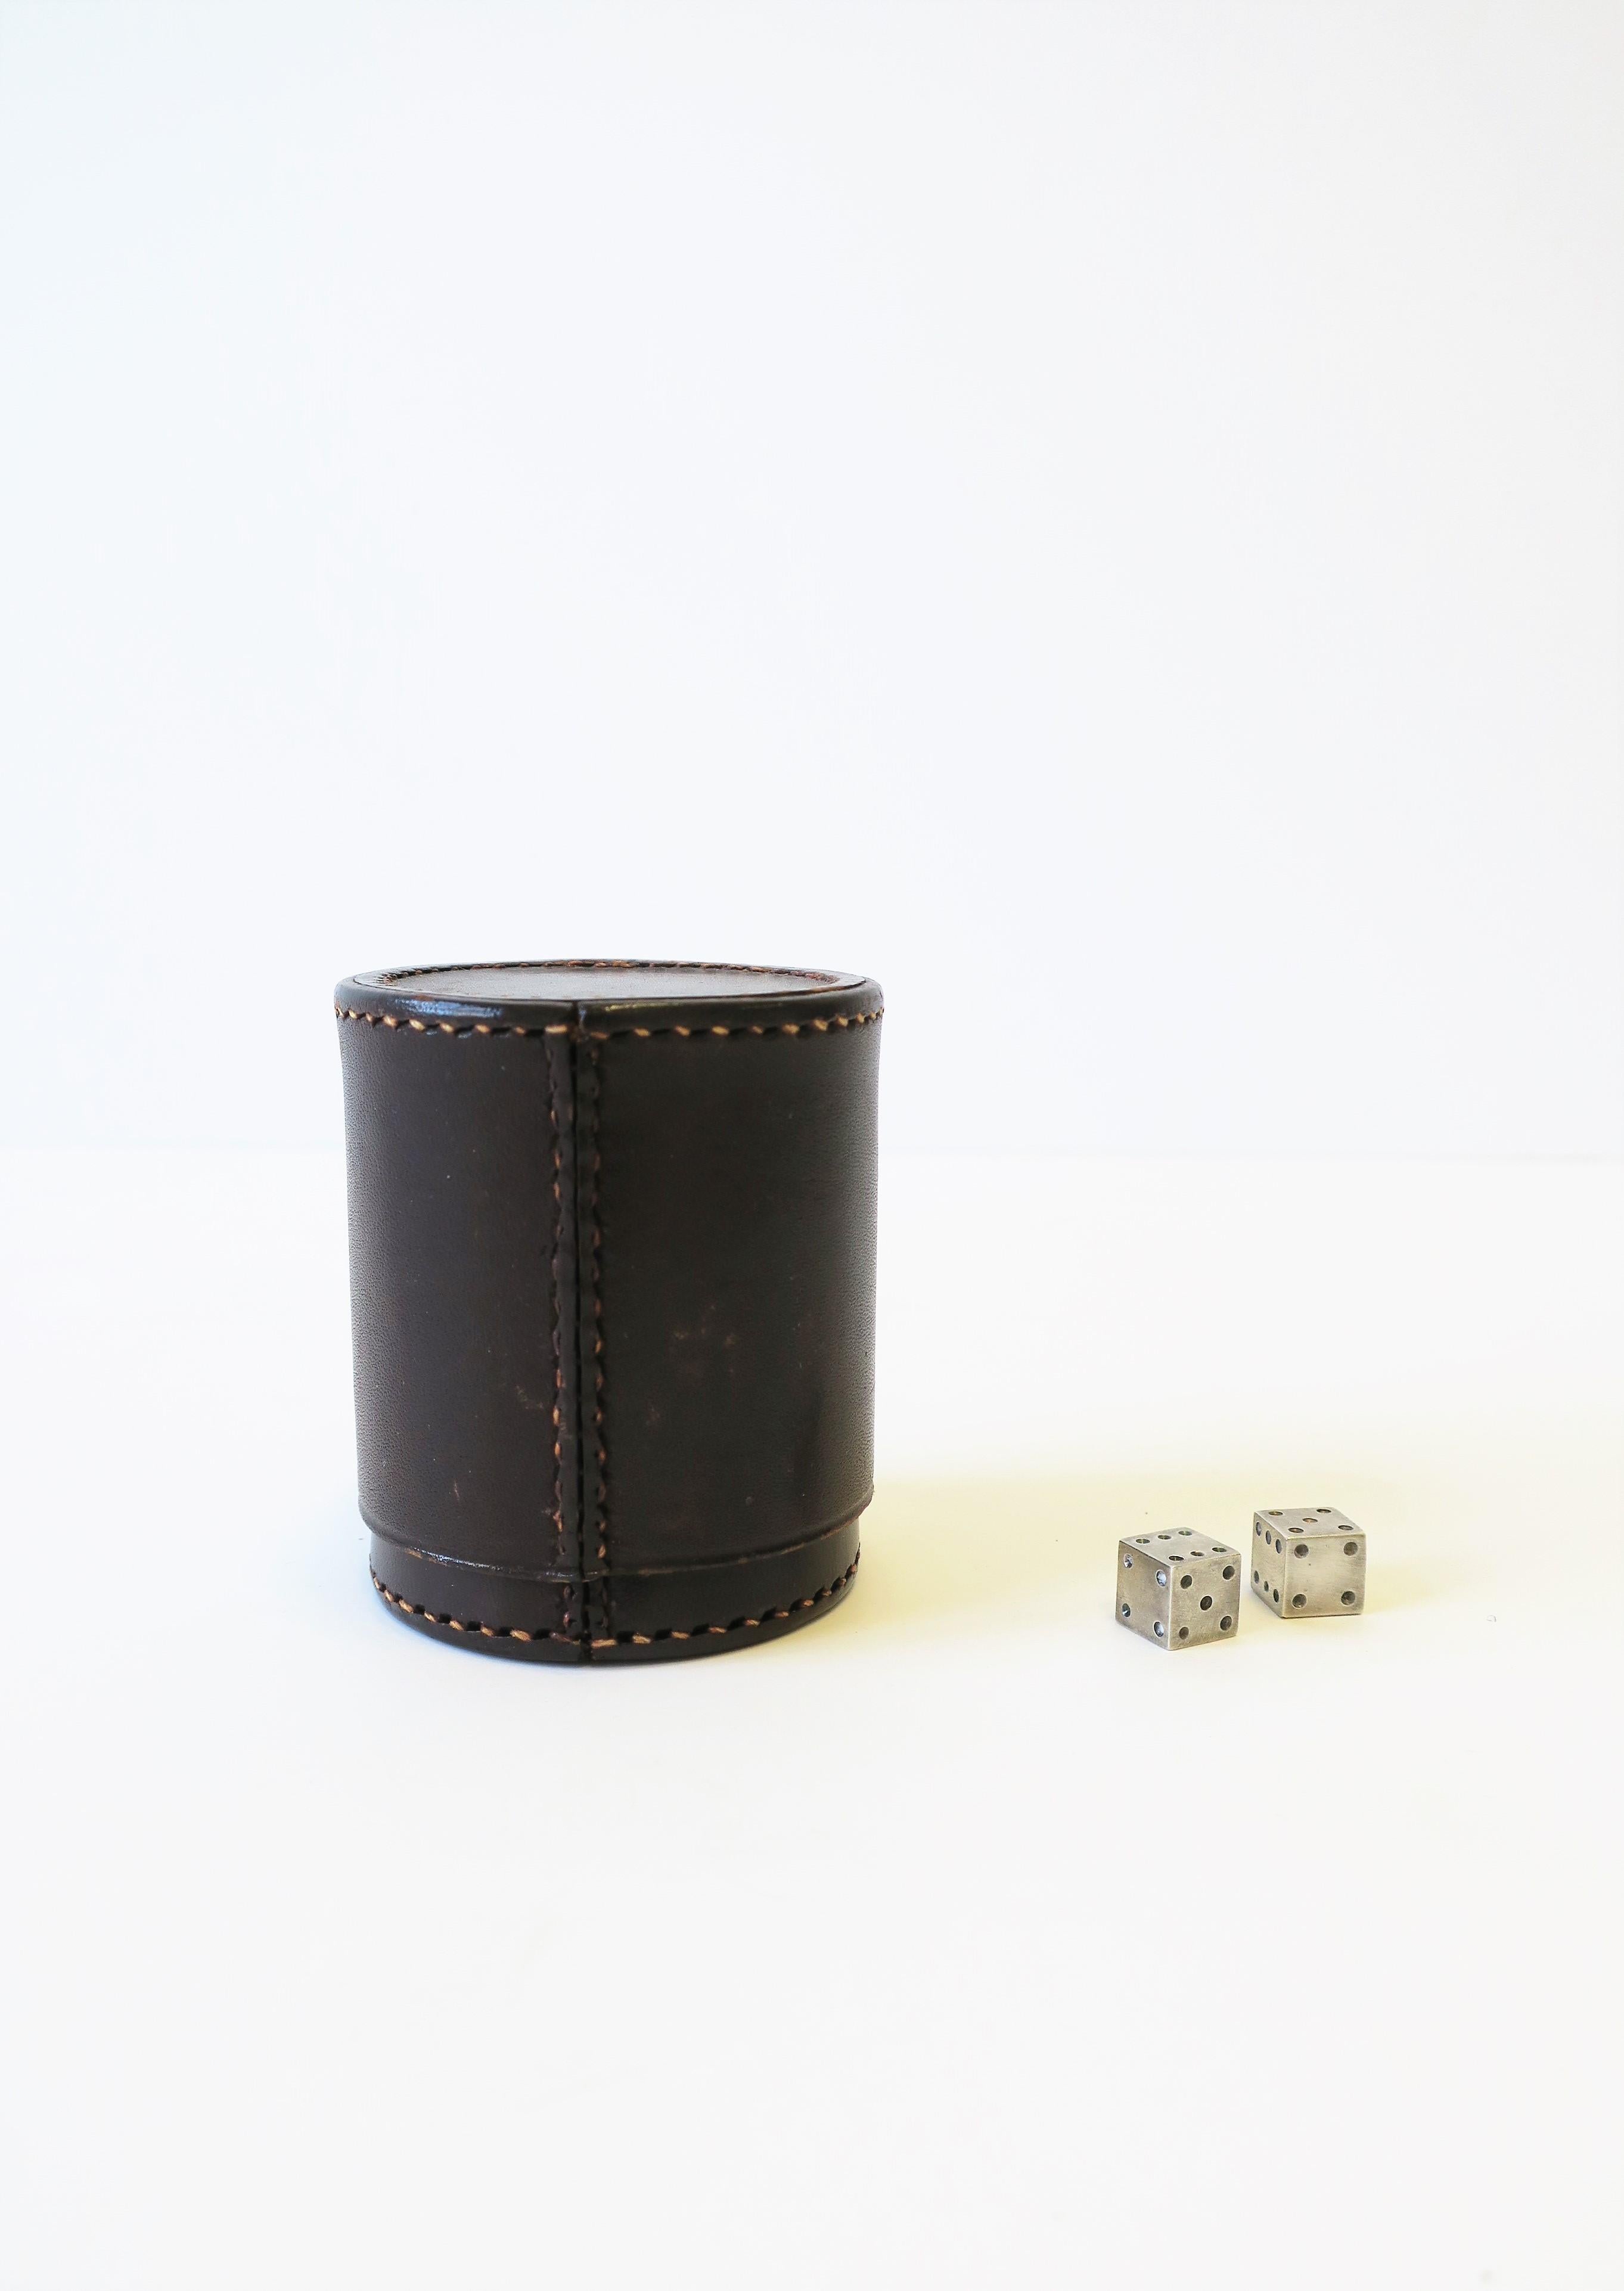 A rich dark brown leather dice shaker with stitch detail and a set of heavy small steel dice, circa mid to late-20th century. A great set for games (board, card games, etc.) Dimensions: 2.69